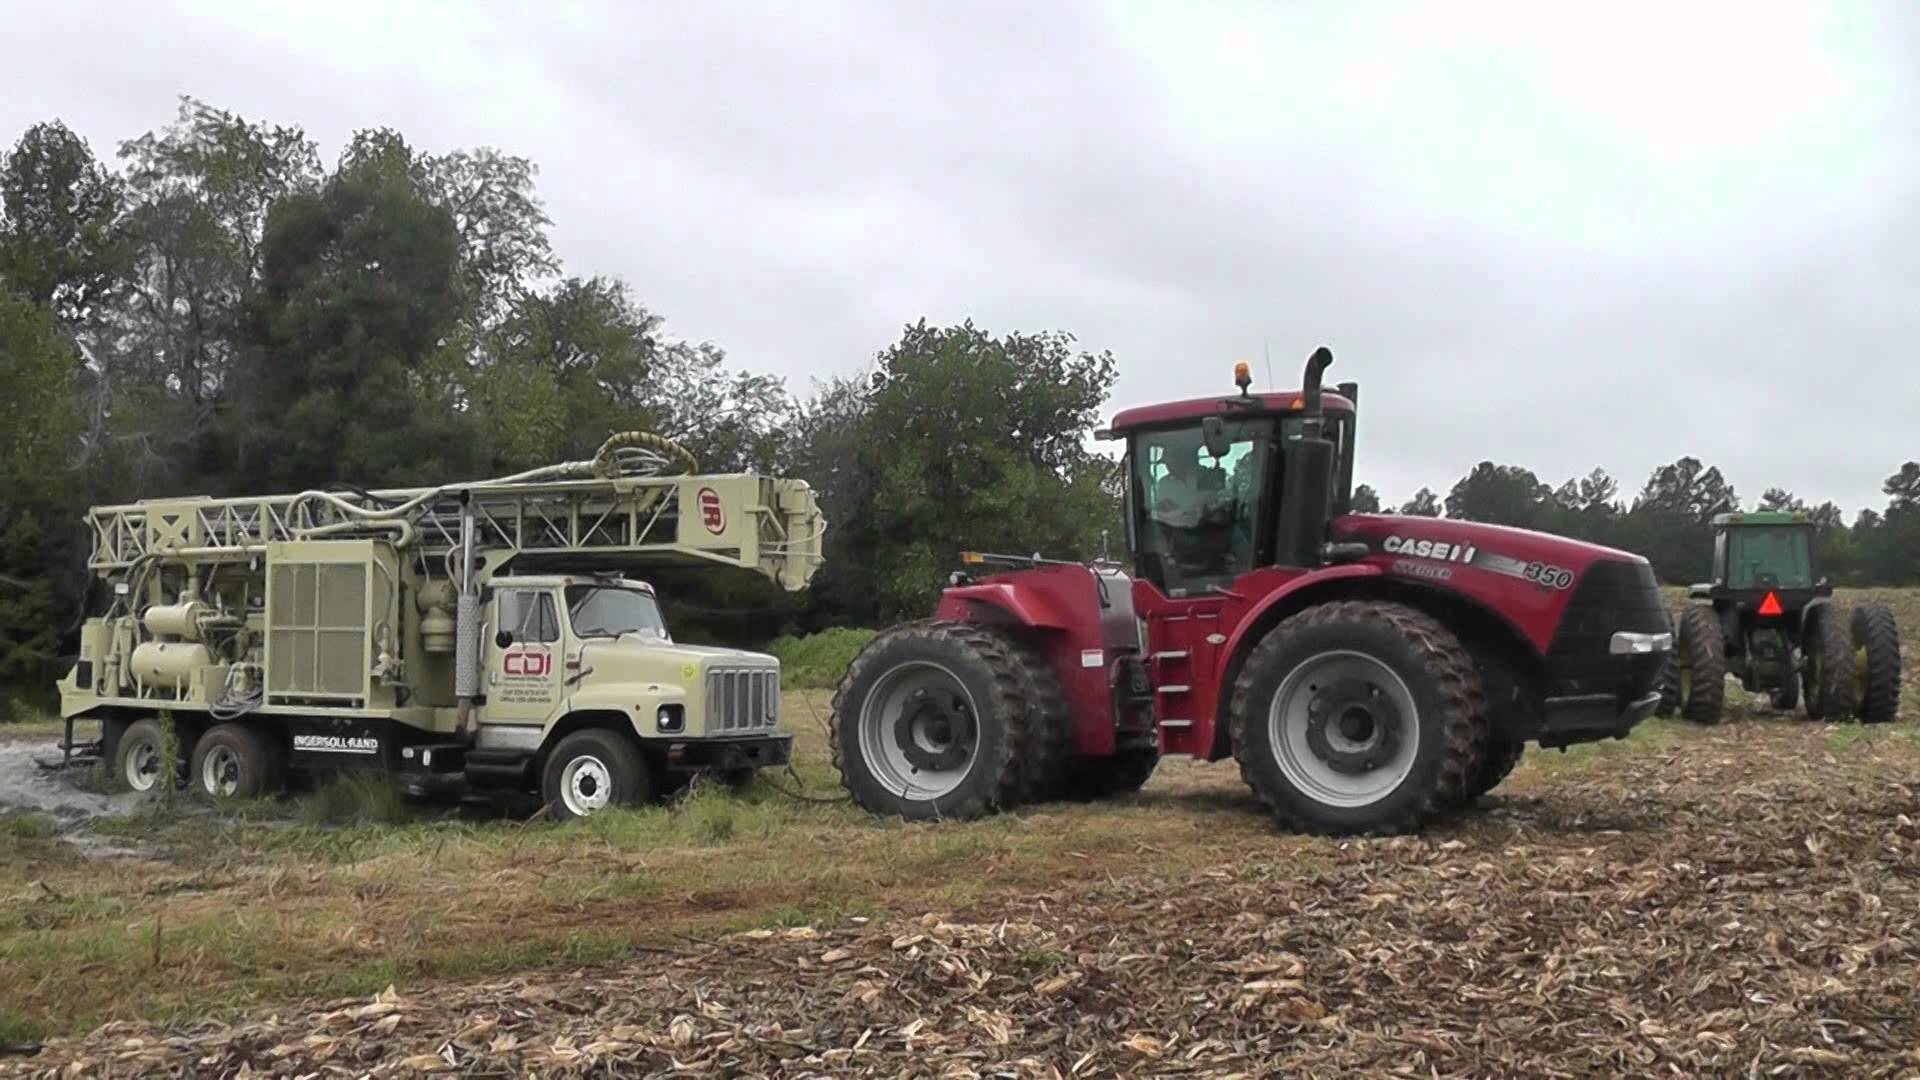 Case IH Steiger 350 Pulls out stuck well drilling rig - YouTube